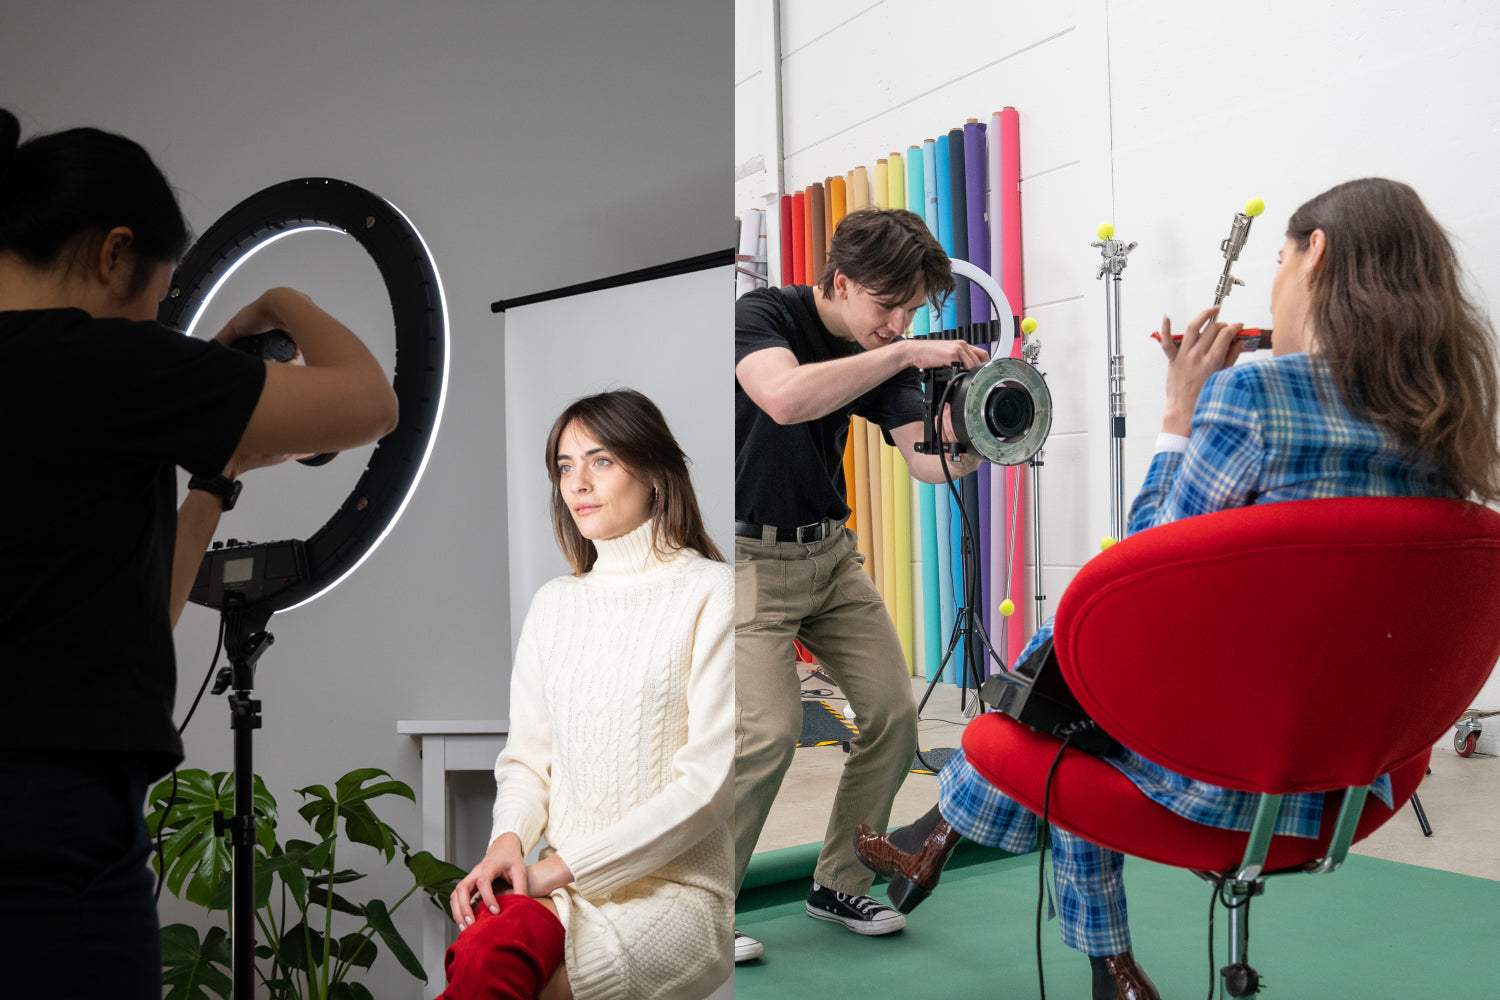 a collage photo of two images. the photo on the right is of a male photographer taking a photo of a woman sitting on a red chair with his camera and ring flash. the left photo is of a female photographer taking a photo of a woman sitting down in front of a ring light.